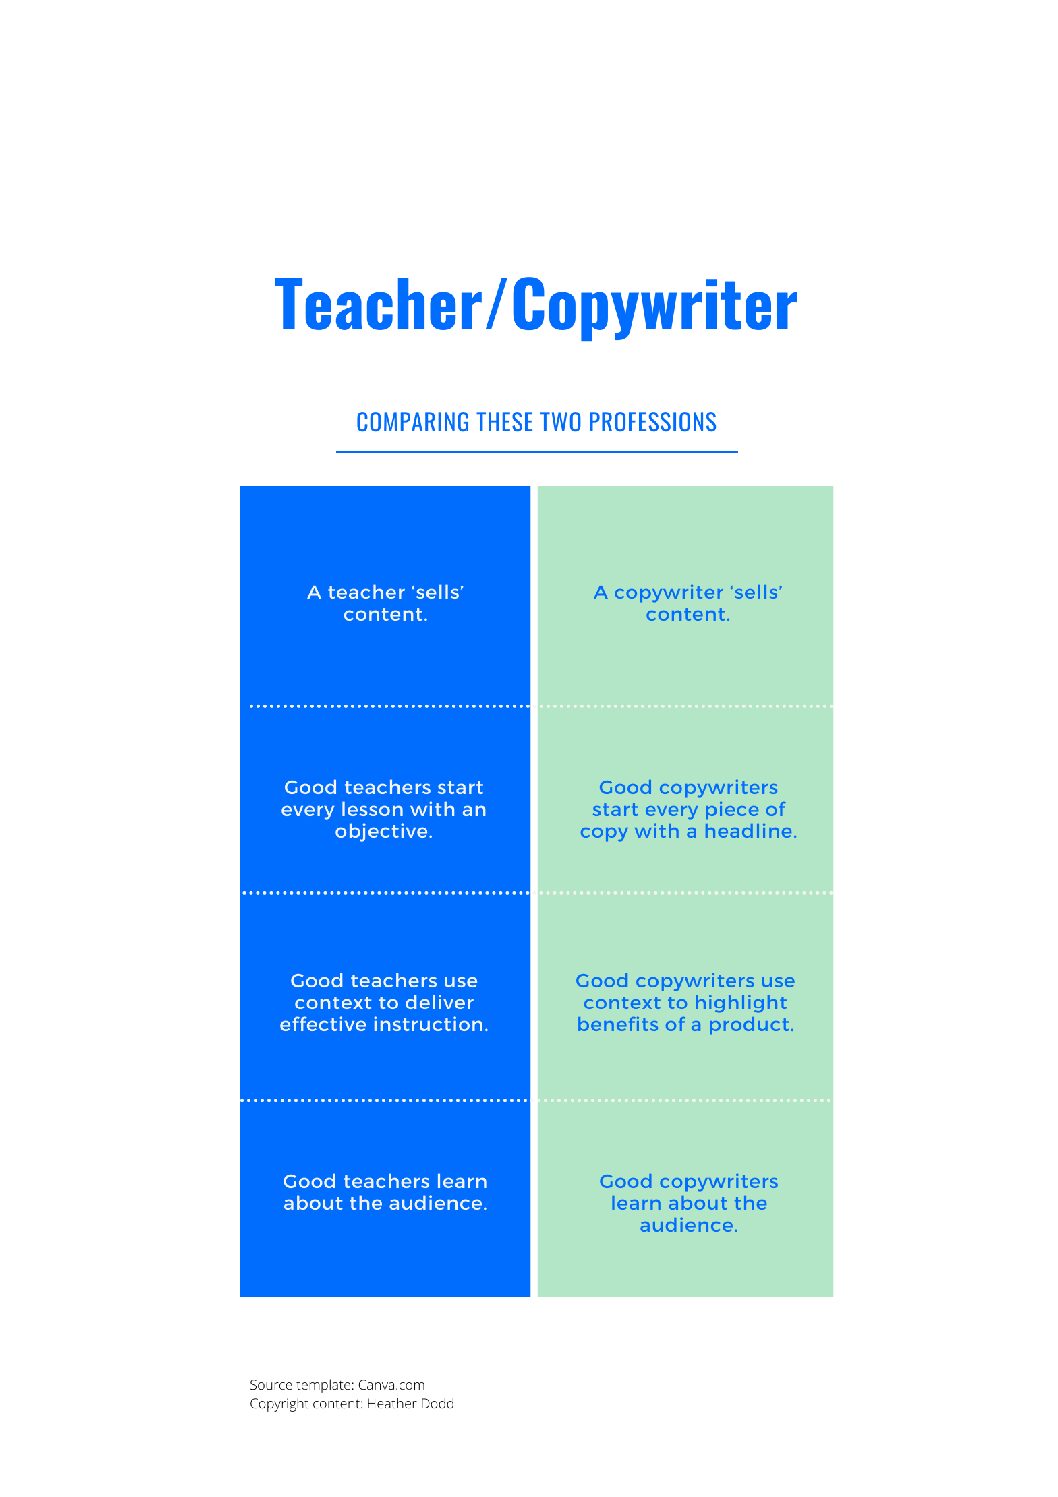 What do copywriters have in common with teachers?